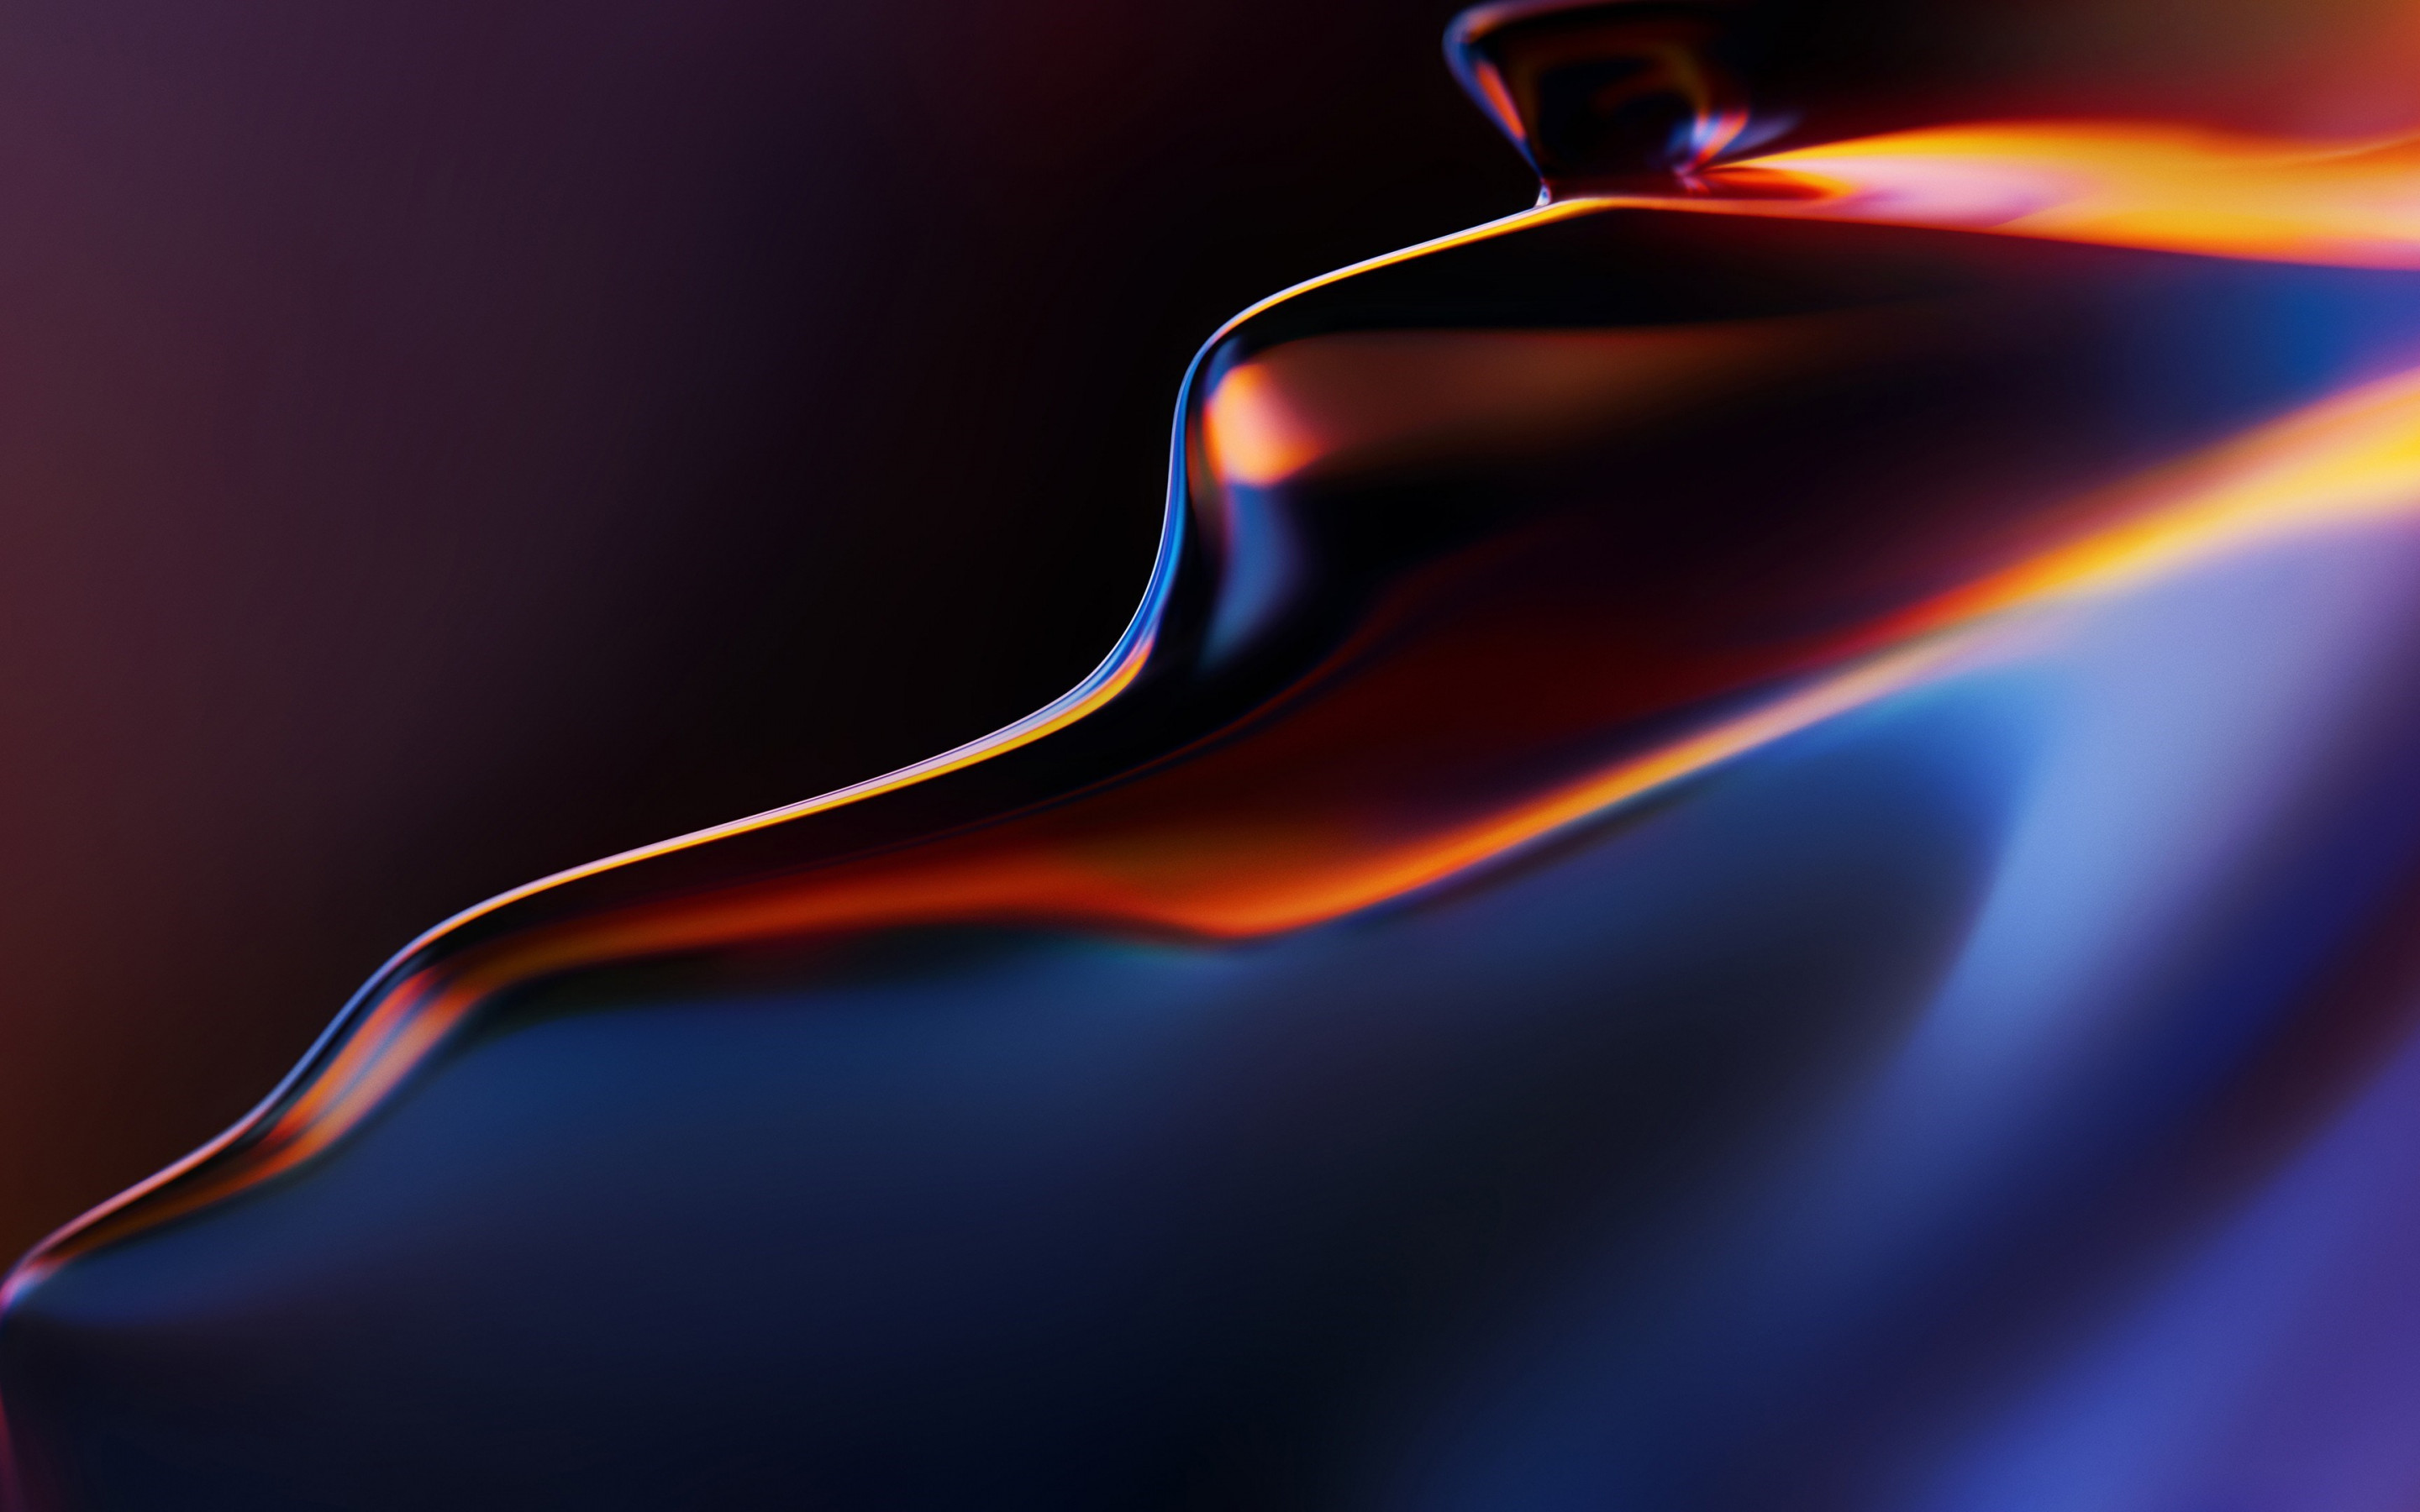 Abstract, flow, OnePlus 6T wallpaper 2880x1800